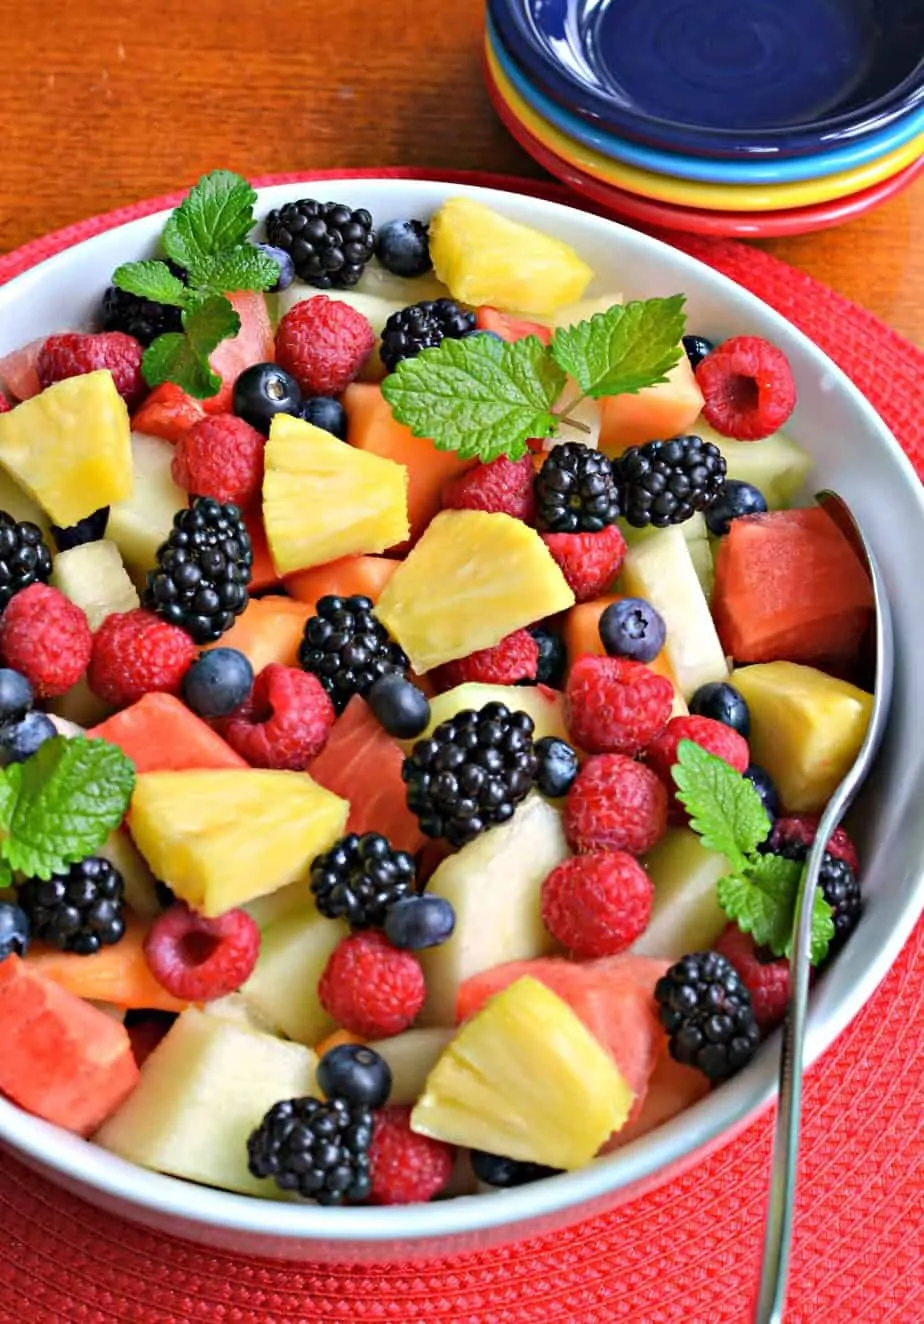 This colorful and refreshing summer fruit salad has all the best summer fruits.